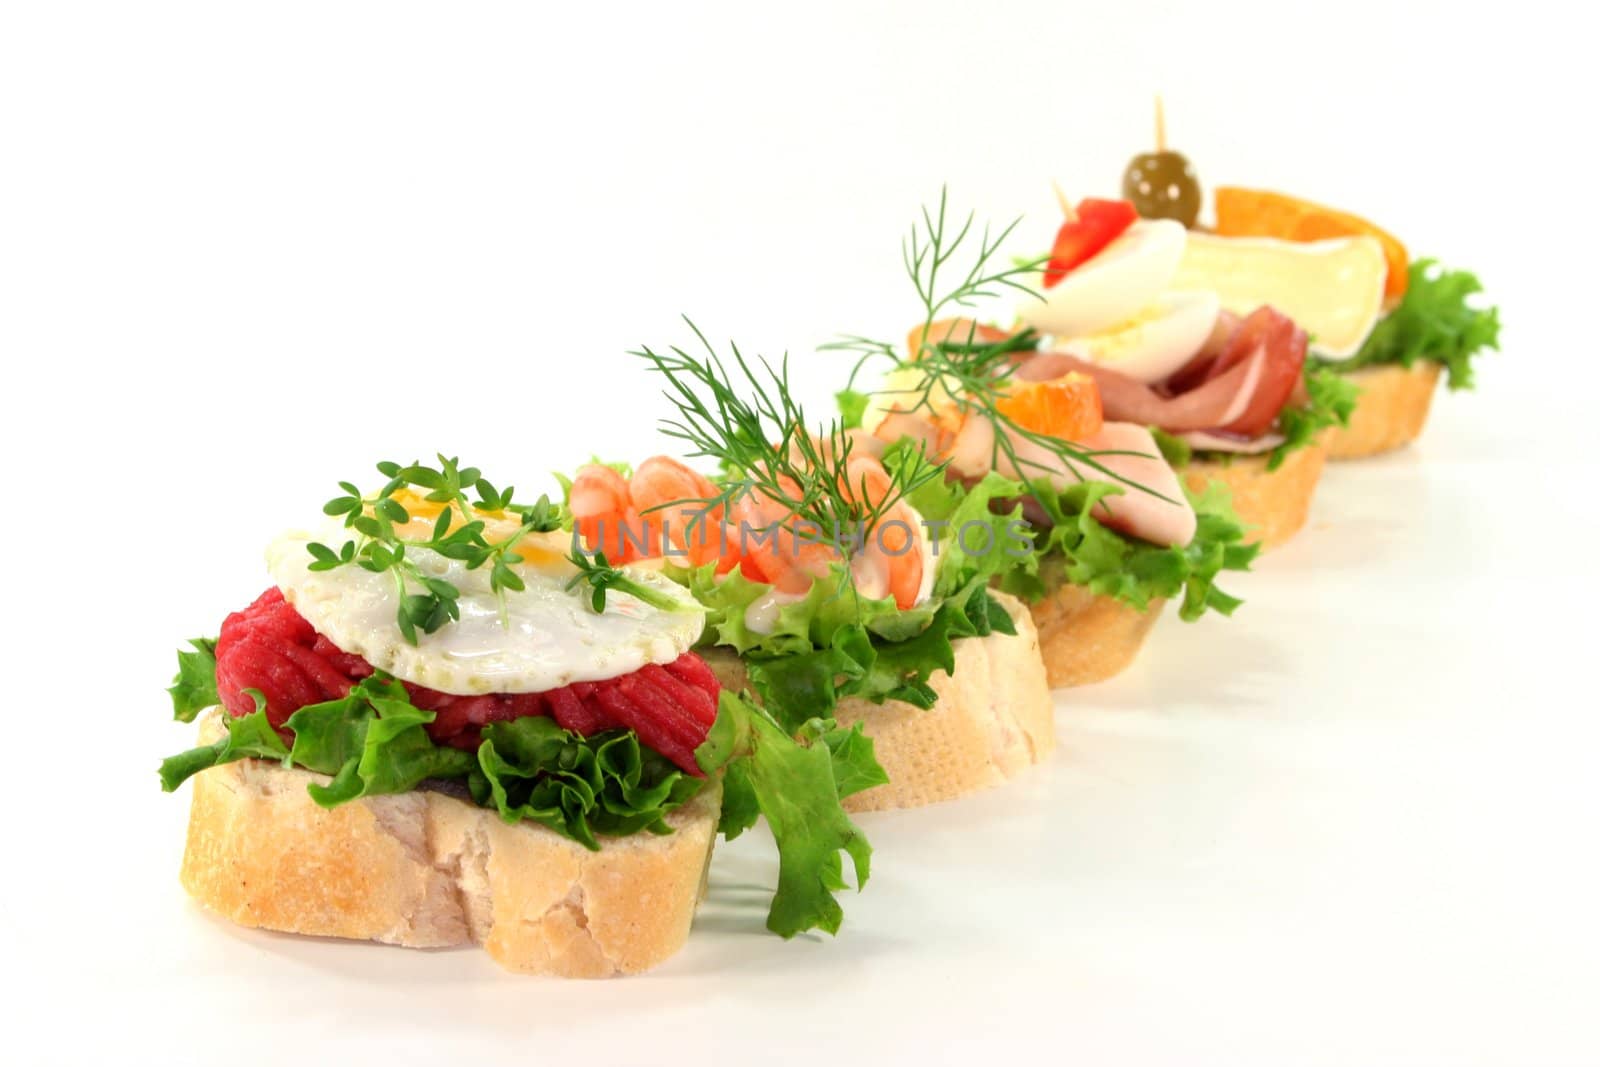 Canape by silencefoto